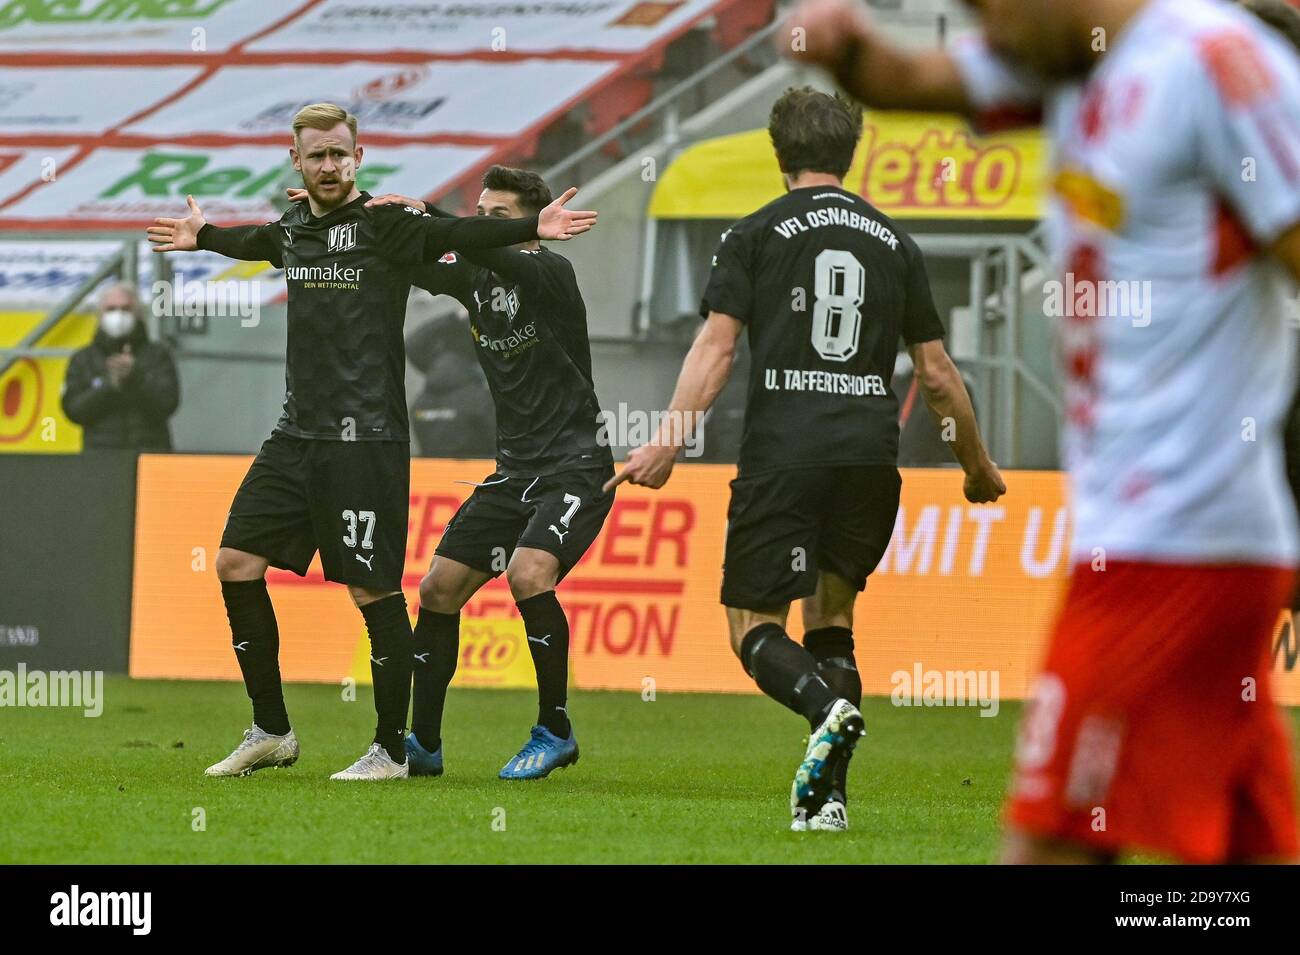 Regensburg, Germany. 08th Nov, 2020. Football: 2nd Bundesliga, Jahn Regensburg - VfL Osnabrück, 7th matchday. Sebastian Kerk von Osnabrück (l) cheers with his team mates Bashkim Ajdini (M) and Ulrich Taffertshofer after his goal to 1:2 against Regensburg. Credit: Armin Weigel/dpa - IMPORTANT NOTE: In accordance with the regulations of the DFL Deutsche Fußball Liga and the DFB Deutscher Fußball-Bund, it is prohibited to exploit or have exploited in the stadium and/or from the game taken photographs in the form of sequence images and/or video-like photo series./dpa/Alamy Live News Stock Photo